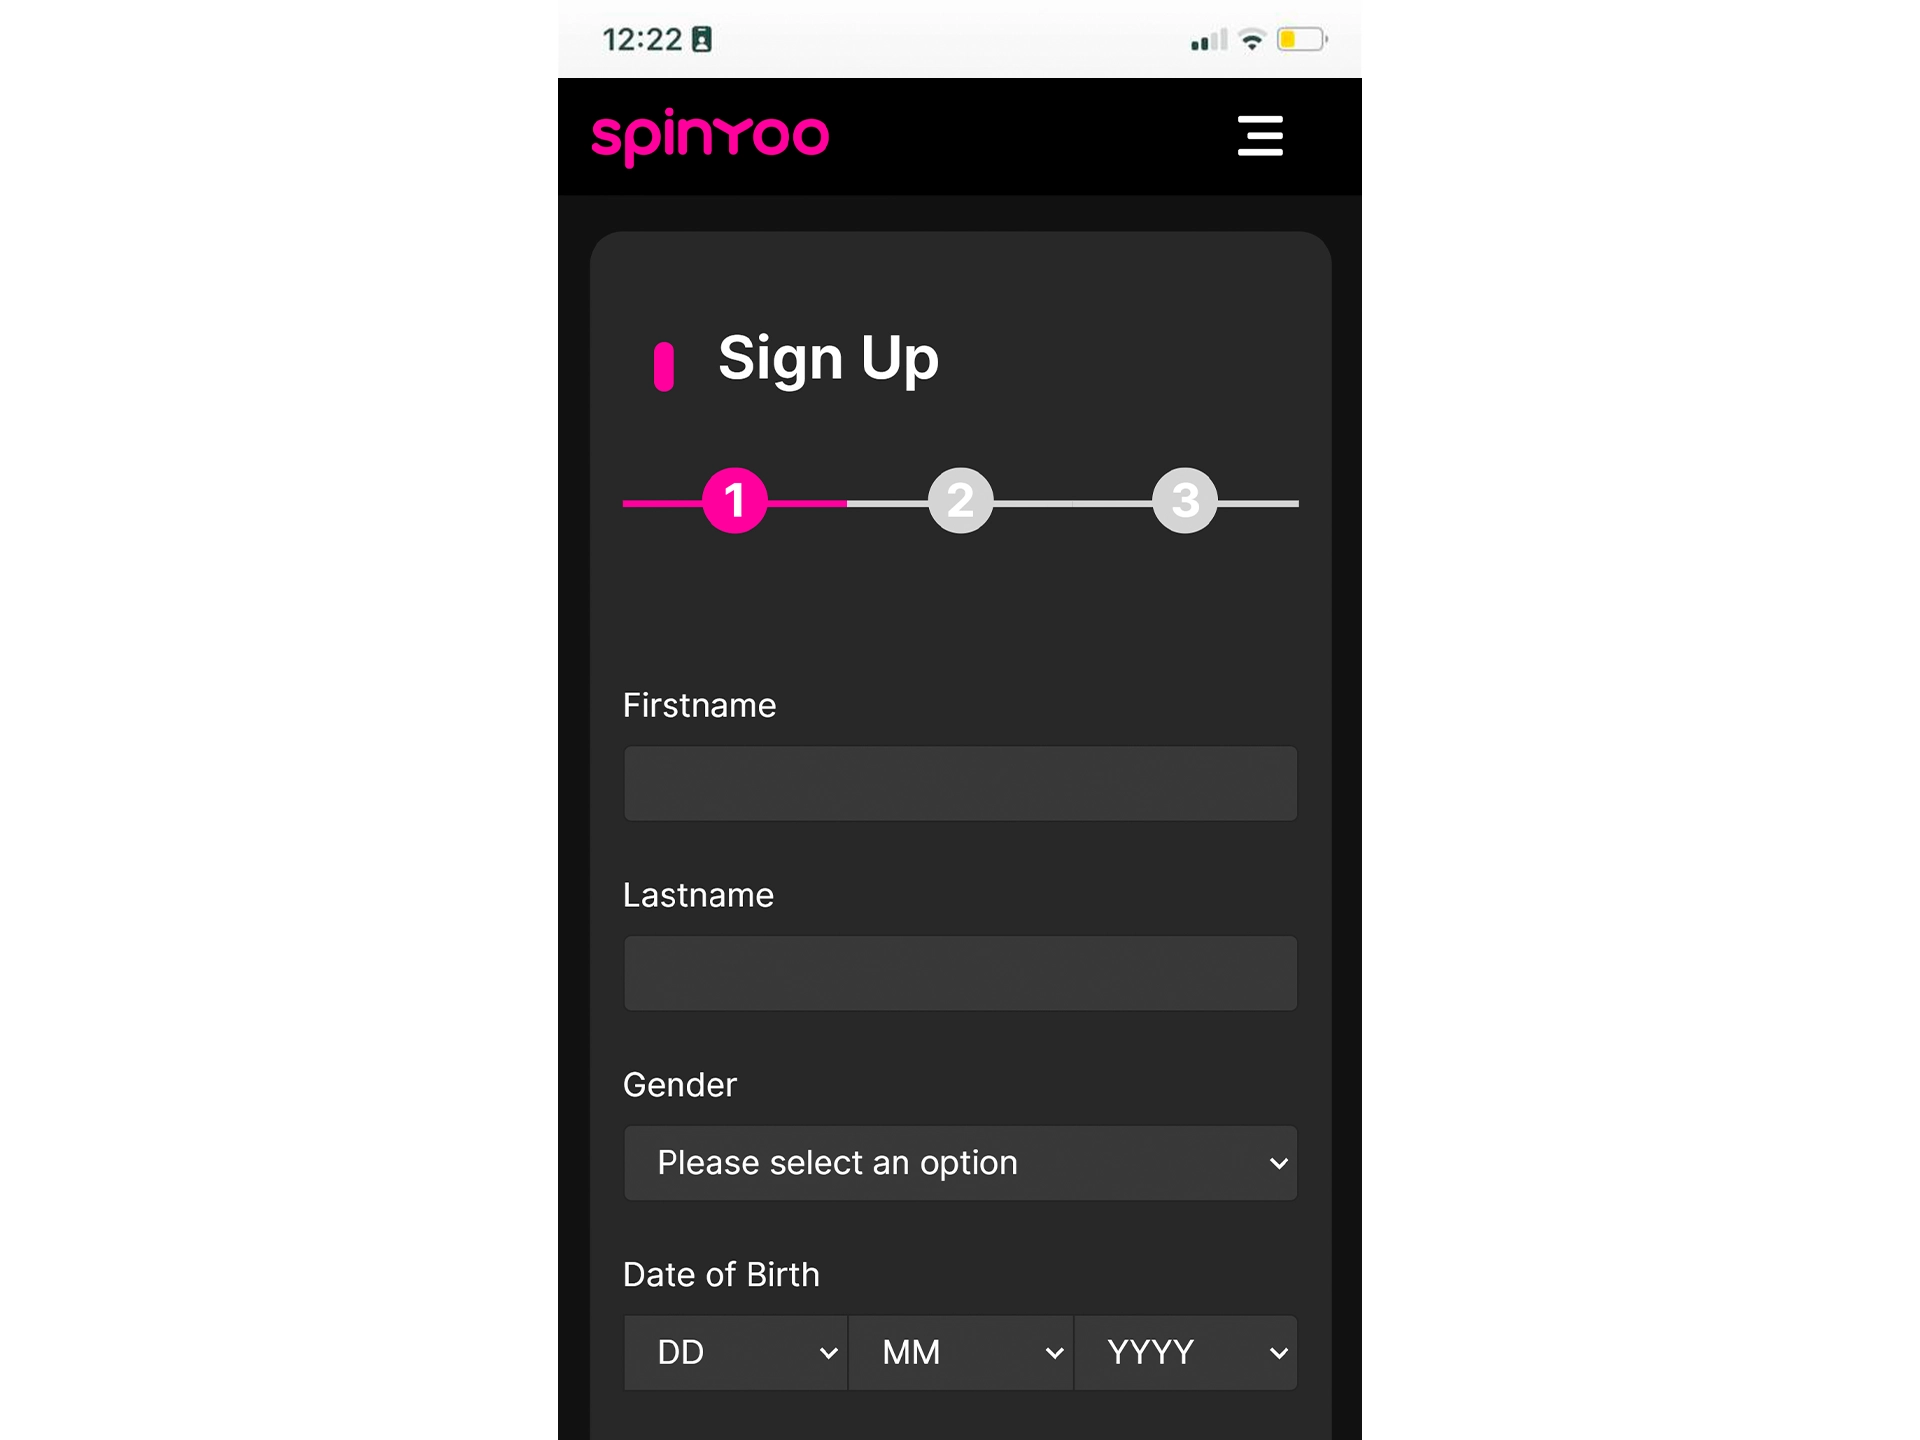 Start registering on the Spinyoo website if you don't have an account.